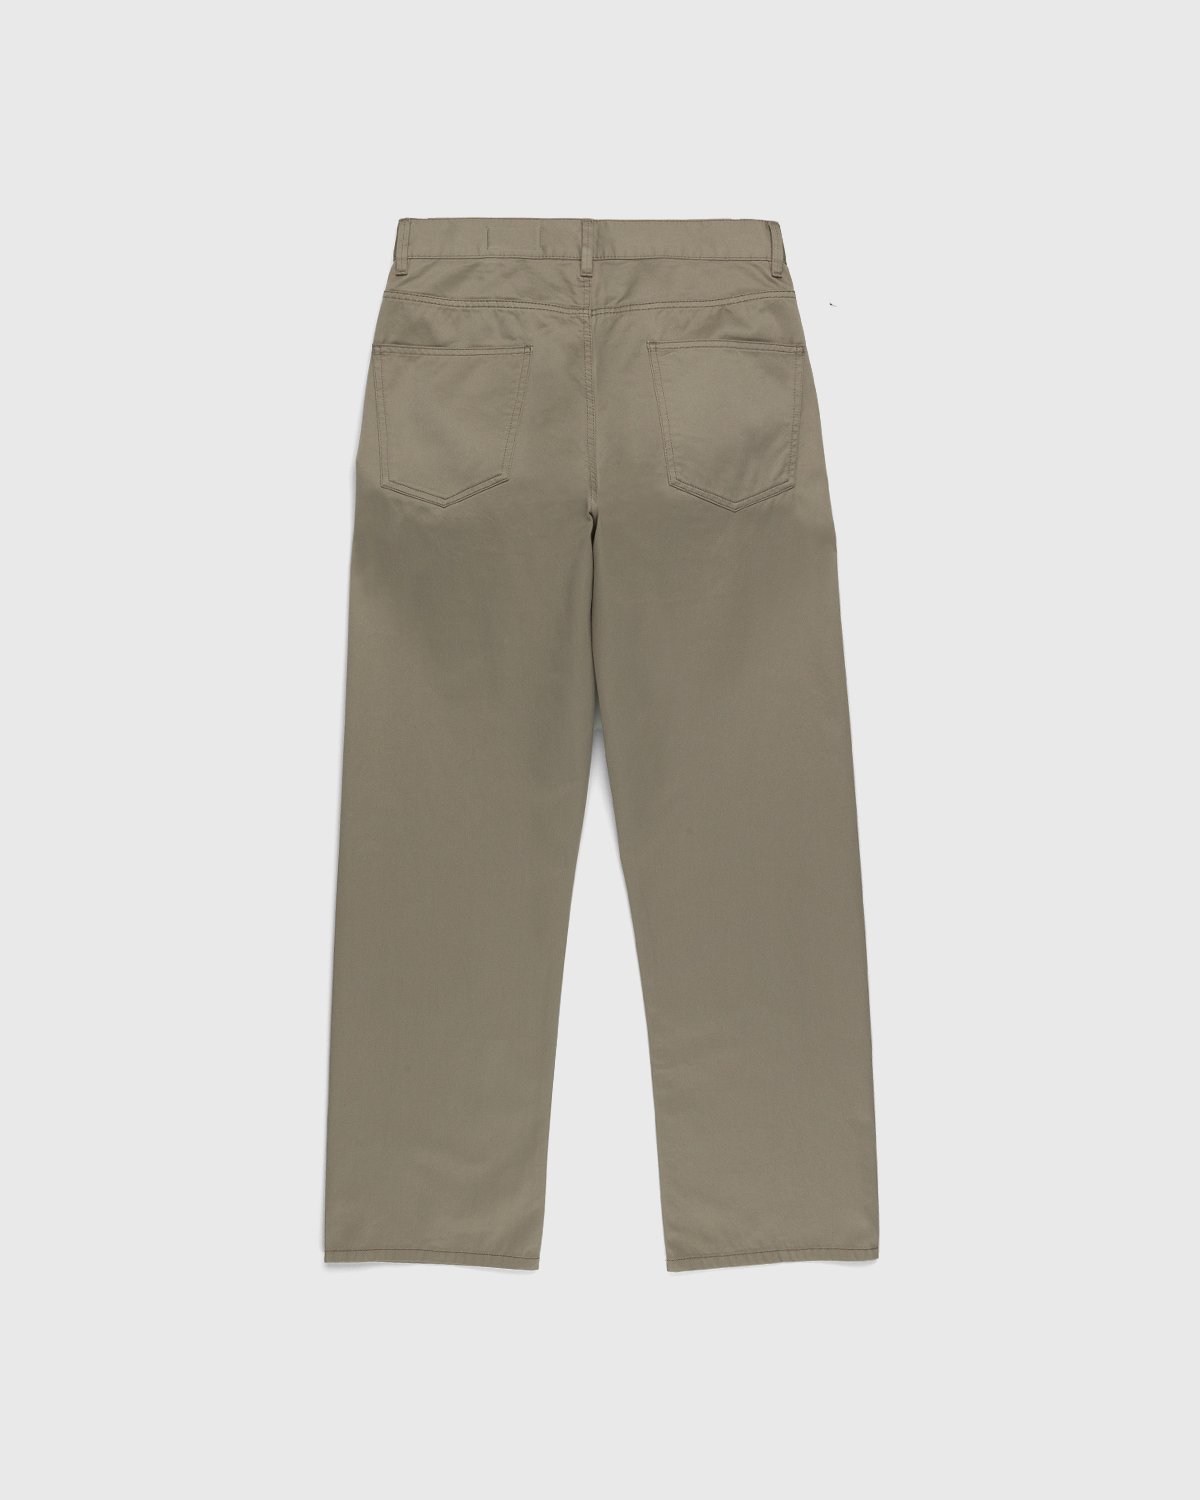 Lemaire - Seamless Pants Light Taupe - Clothing - Beige - Image 2